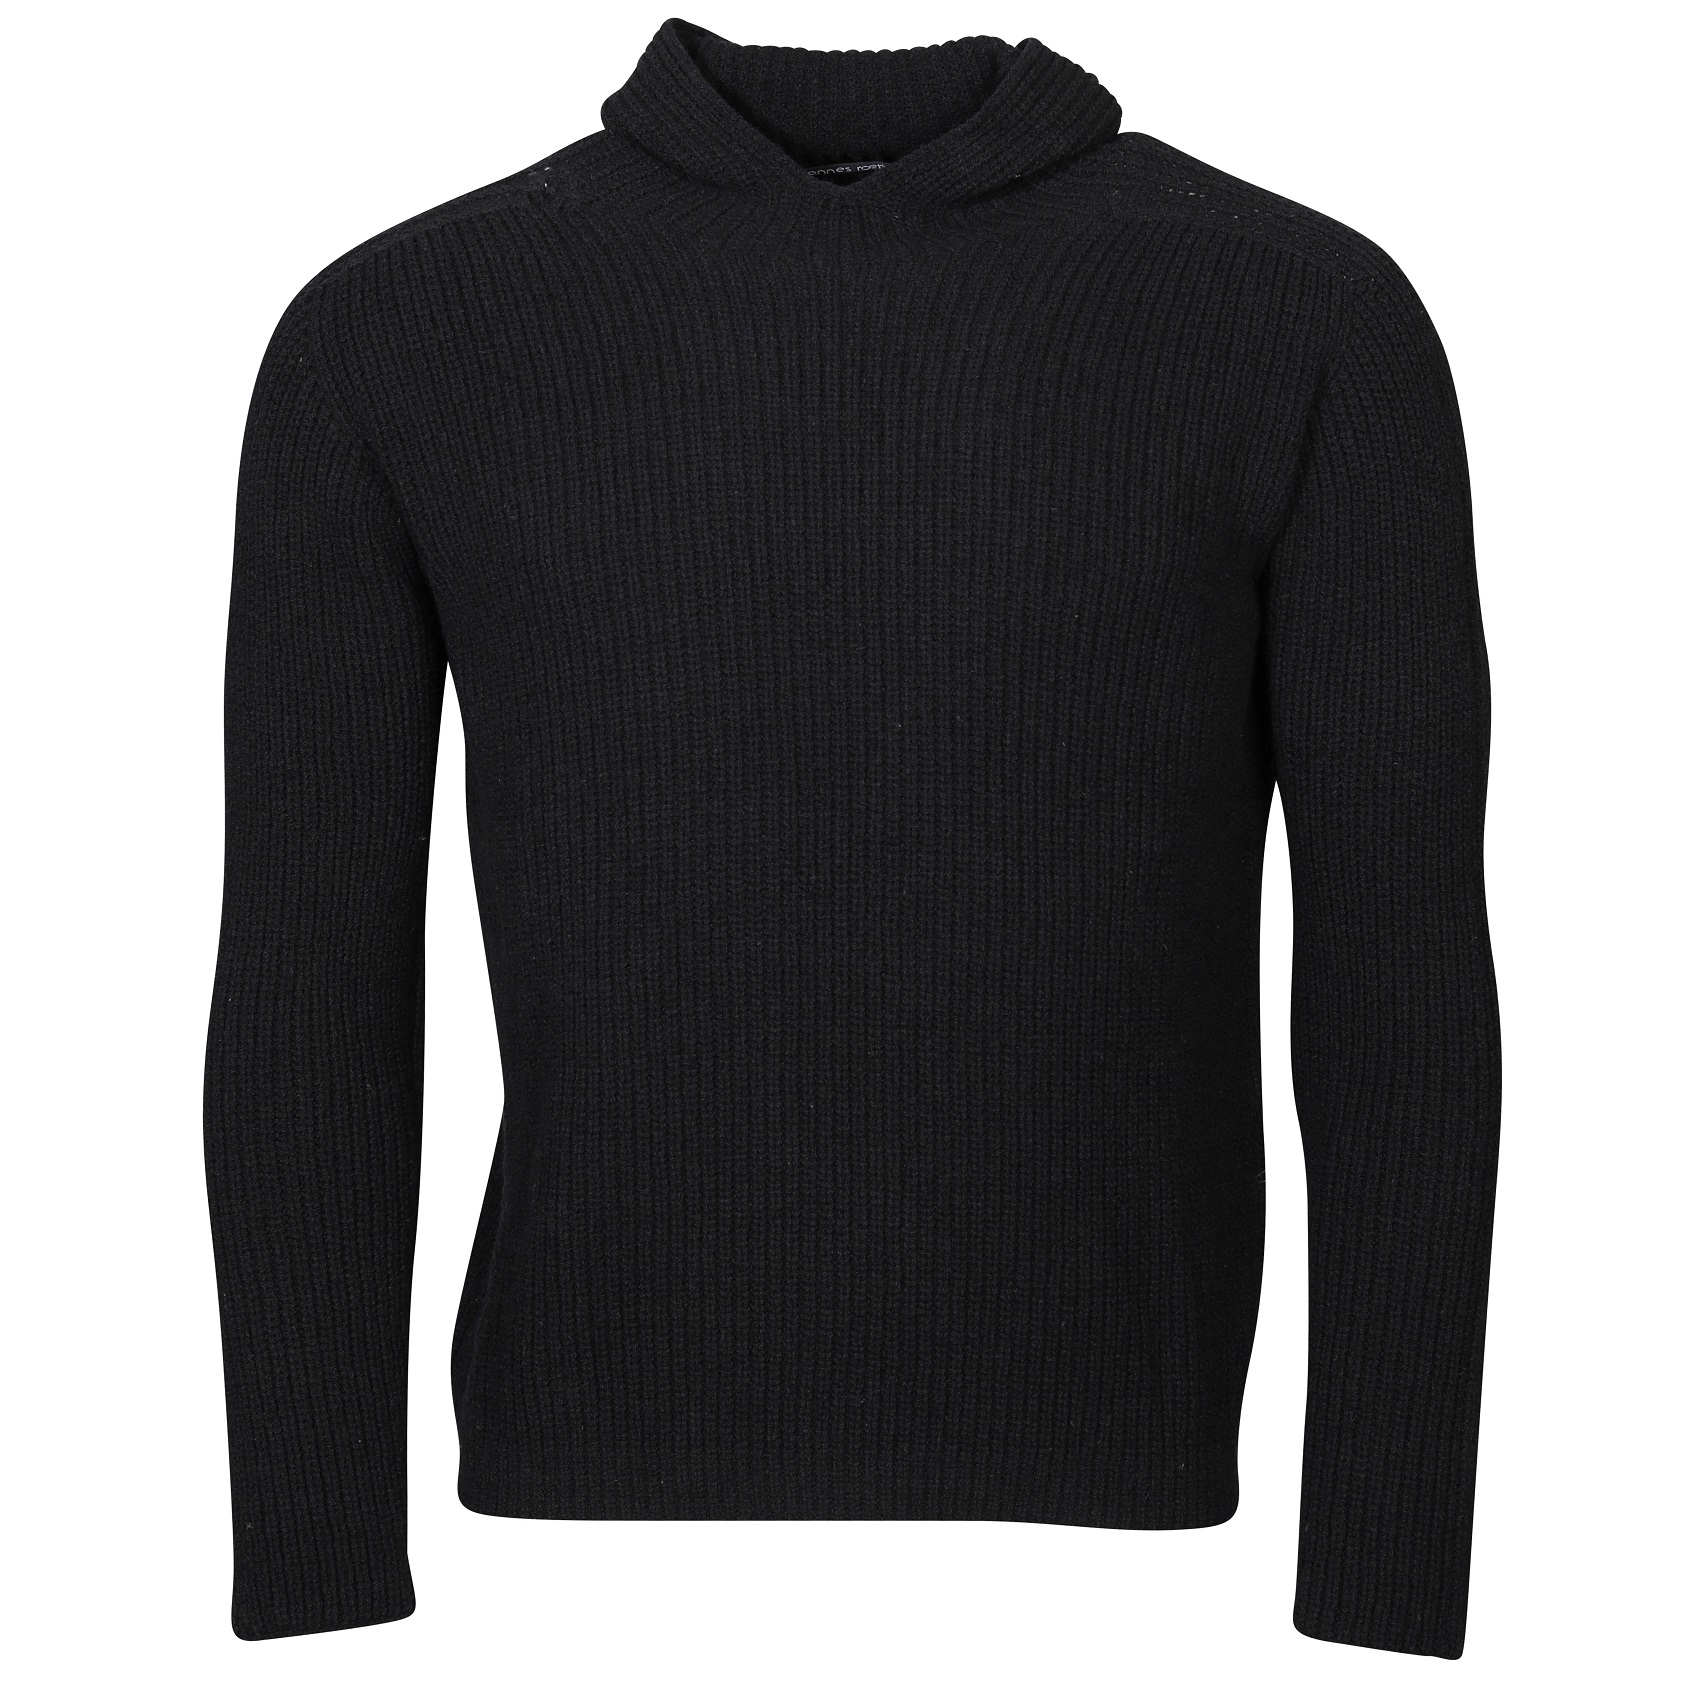 HANNES ROETHER Hooded Knit Pullover in Black